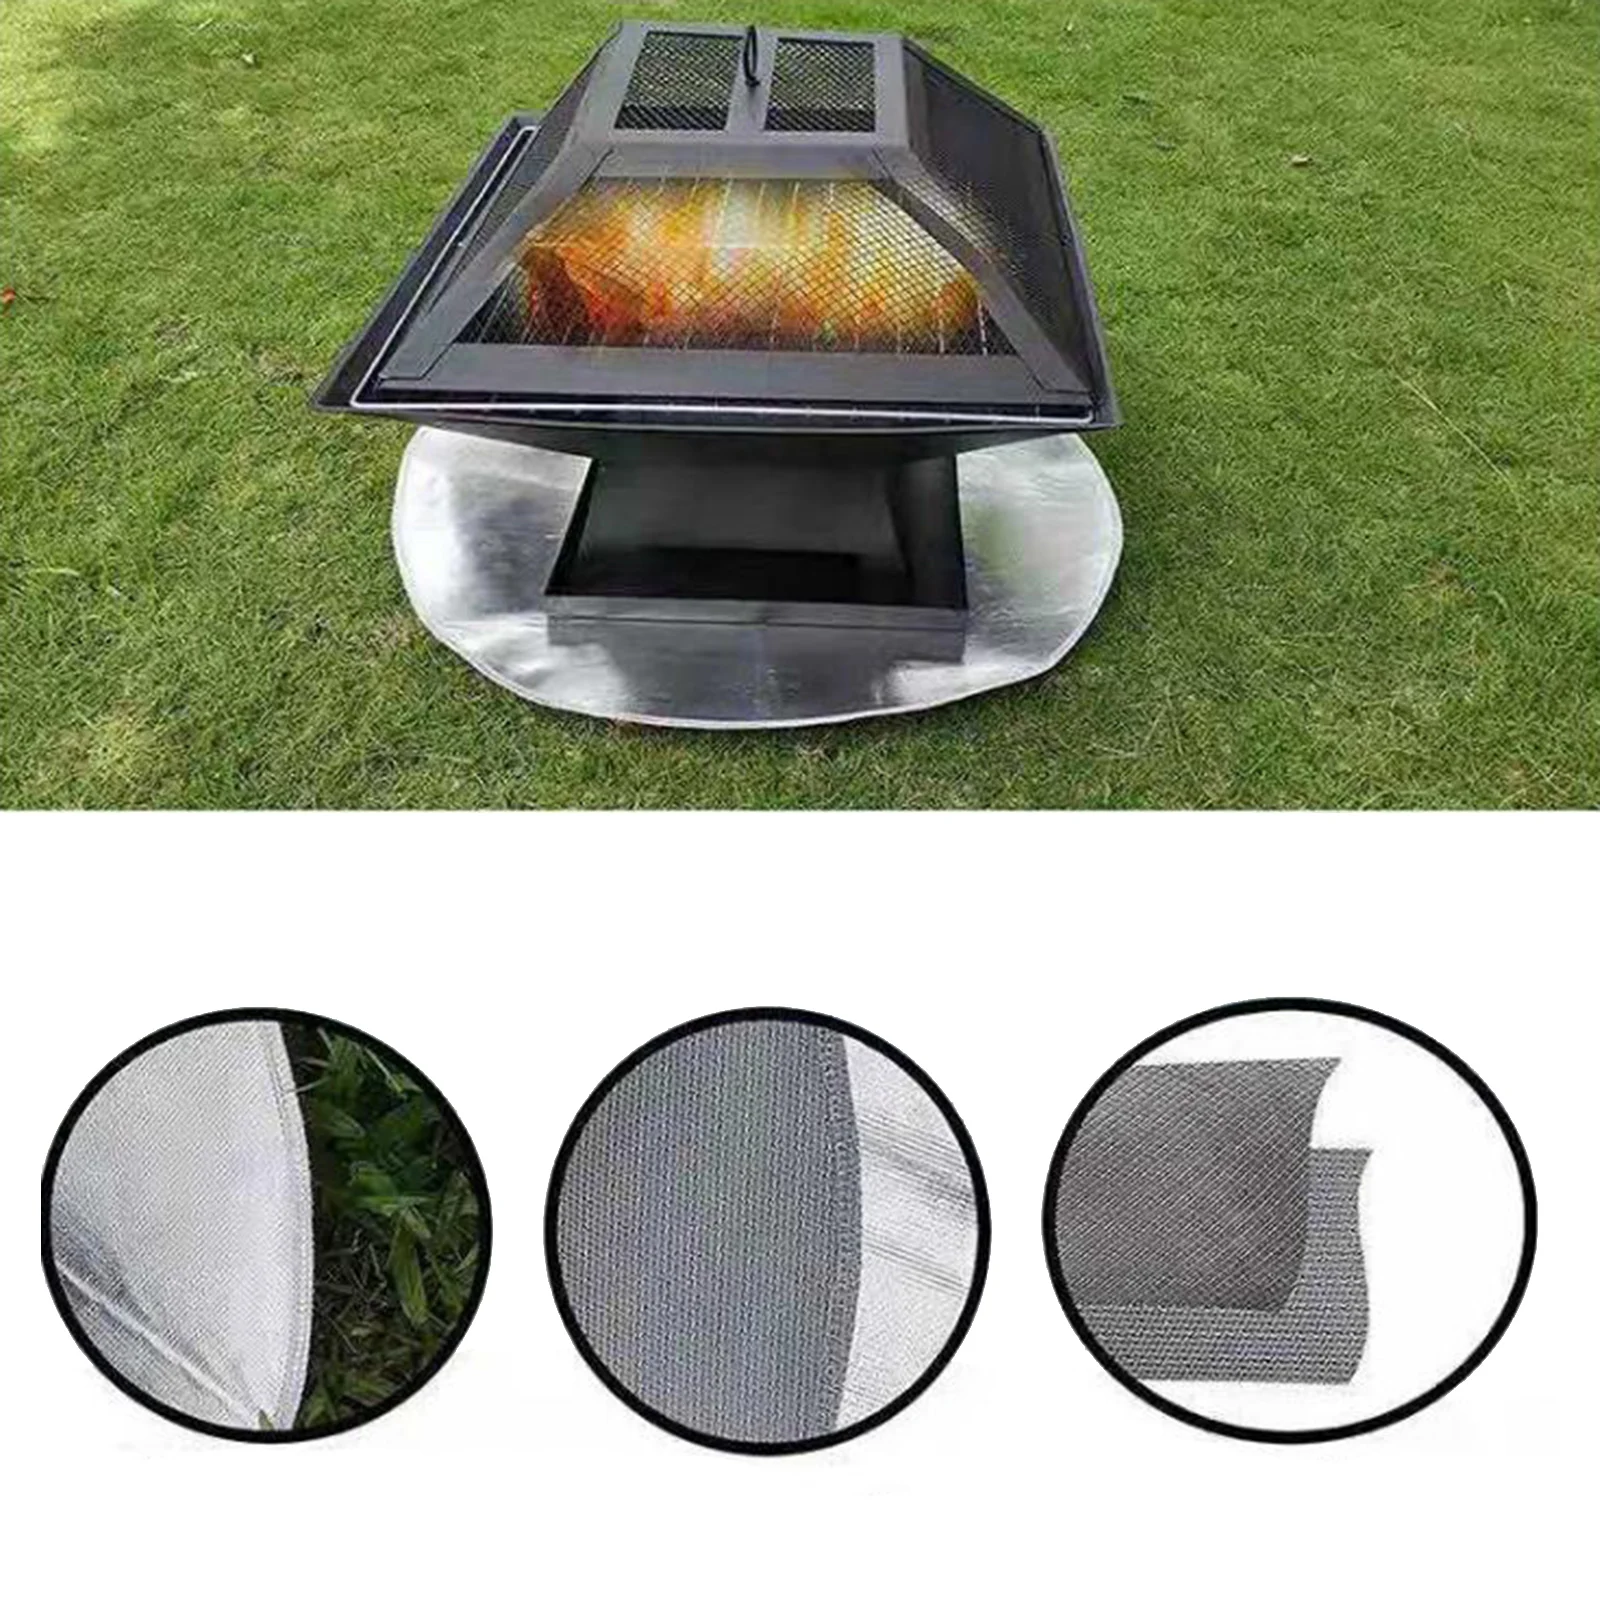 Fire Pit Mat for Deck Patio Fire Pit Pad Fireproof Mat Deck Protector Fire-Resistant Round Wood Burning Grill Mat for Lawn